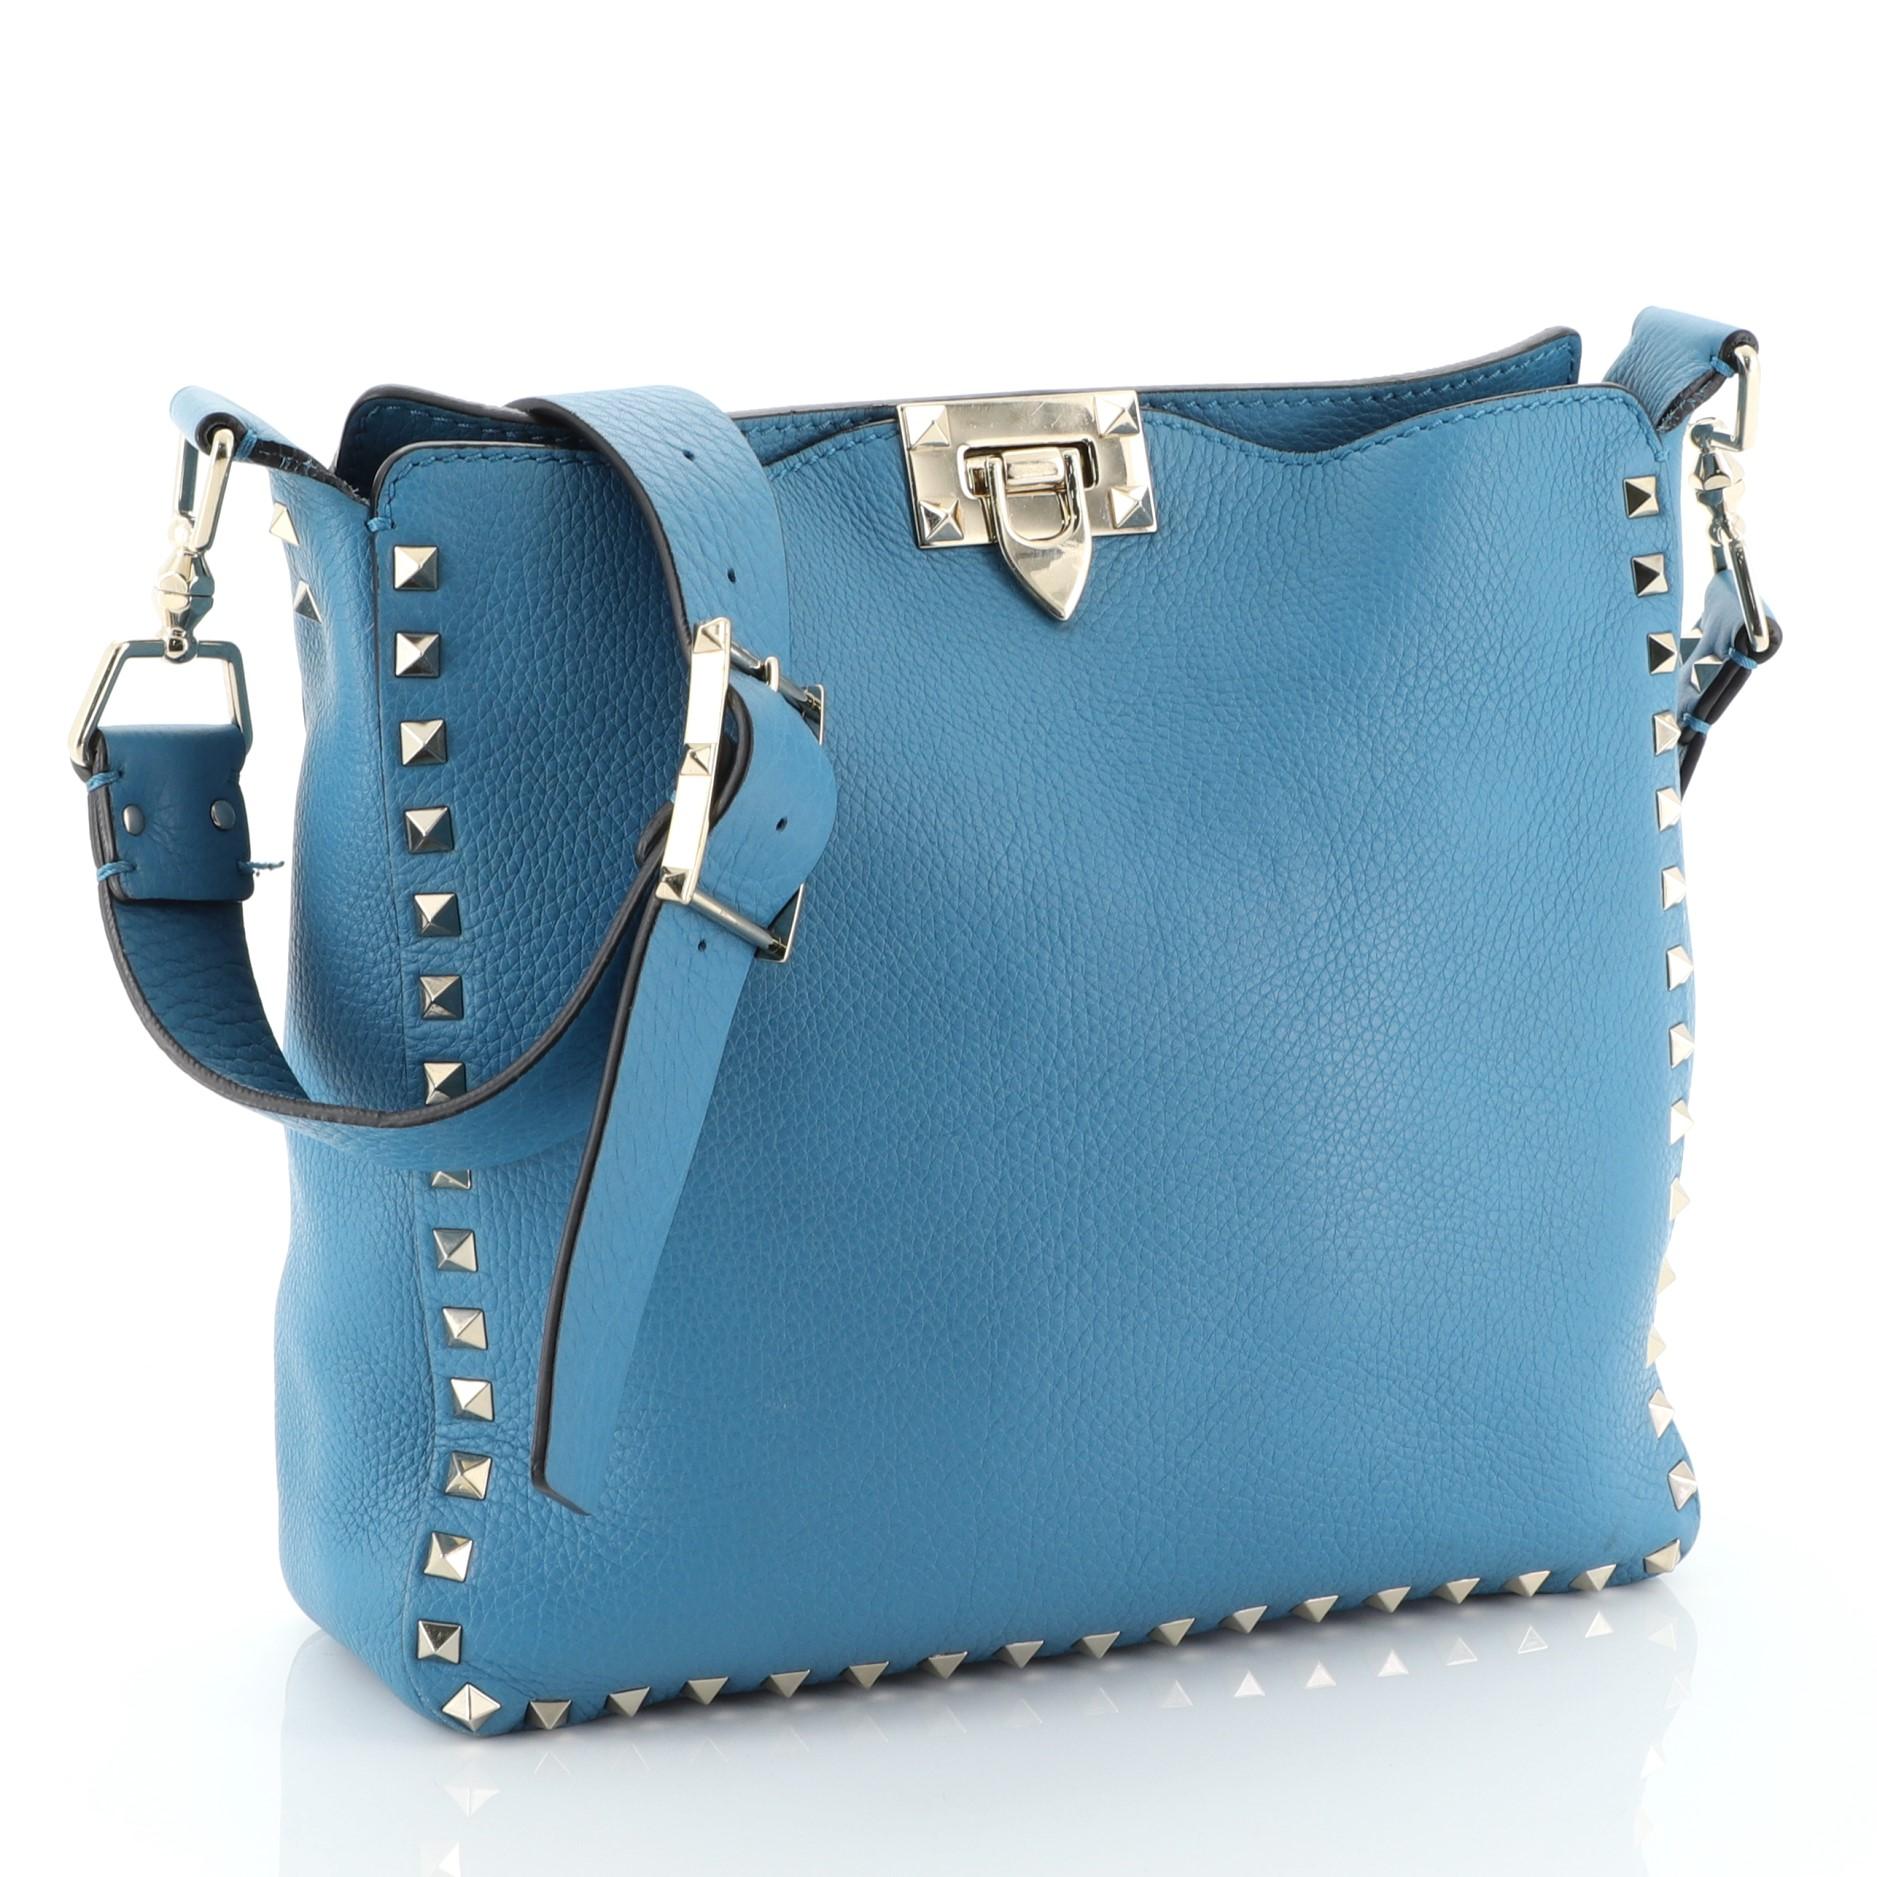 This Valentino Rockstud Flip Lock Messenger Bag Leather Small, crafted in blue leather, features an adjustable cross-body strap, pyramid studs detailing, stamped logo and gold-tone hardware. Its flip-lock closure opens to a blue suede interior with